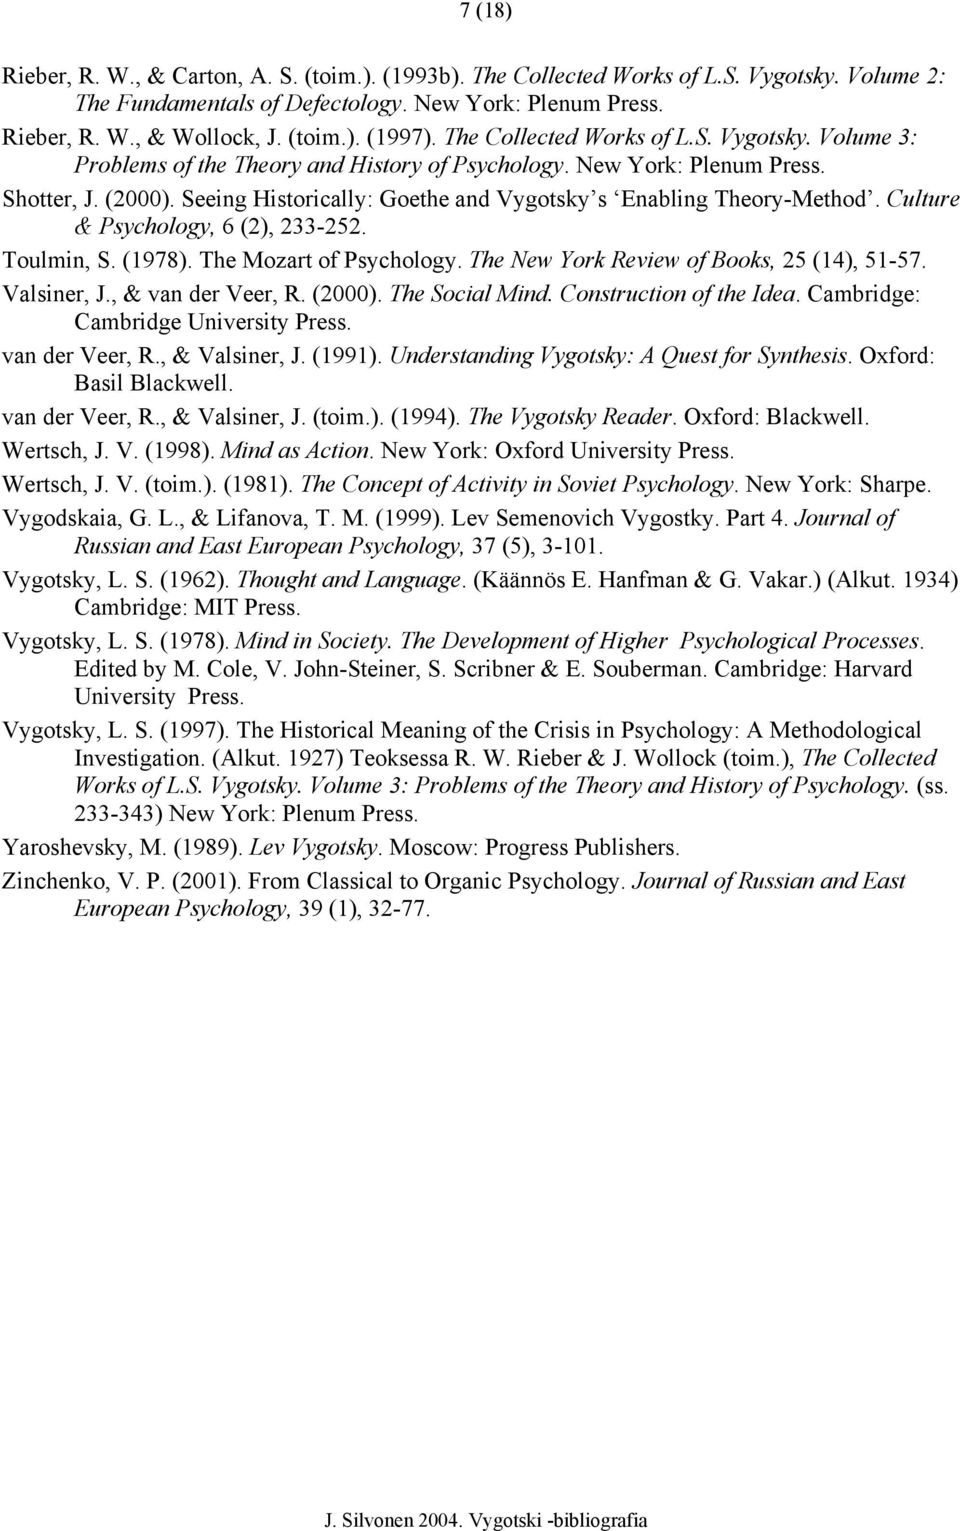 Seeing Historically: Goethe and Vygotsky s Enabling Theory-Method. Culture & Psychology, 6 (2), 233-252. Toulmin, S. (1978). The Mozart of Psychology. The New York Review of Books, 25 (14), 51-57.